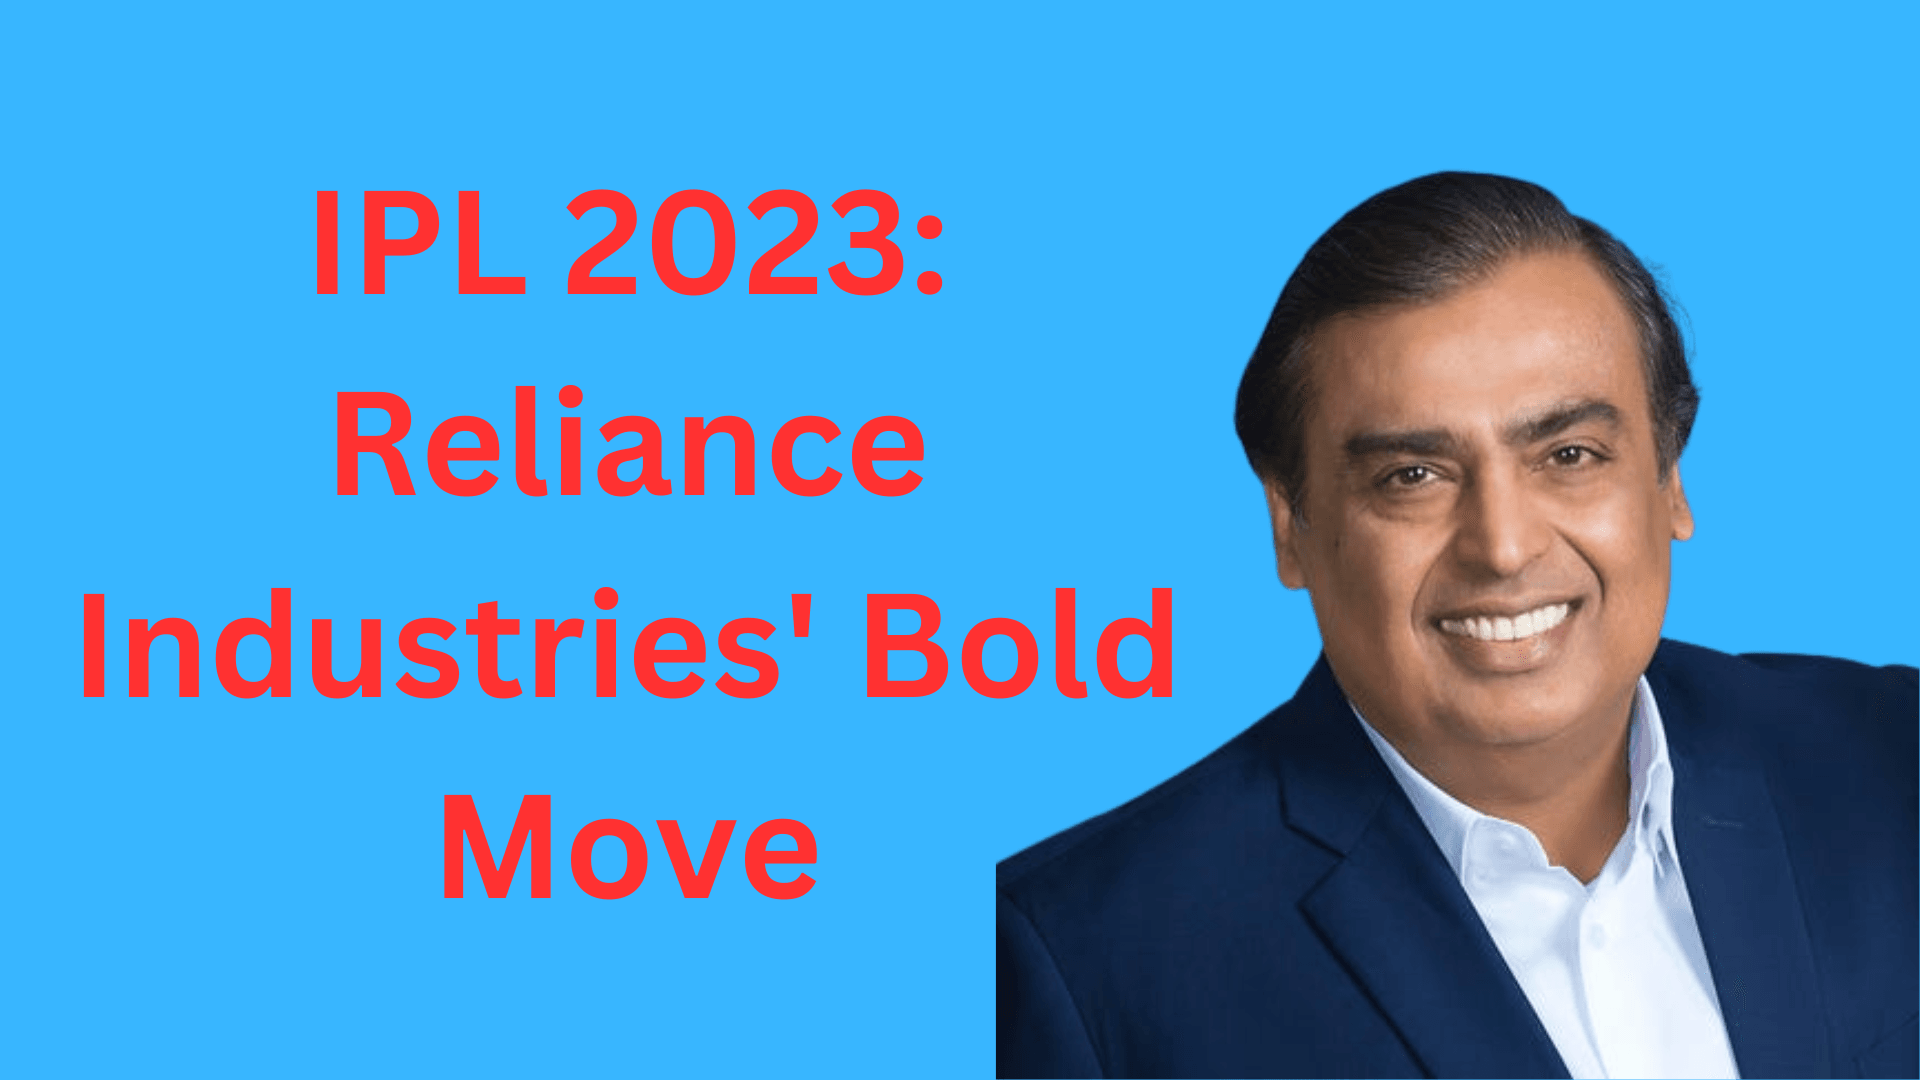 IPL 2023: Reliance Industries' Bold Move to Stream Matches for Free on Jio Platforms Could Disrupt India's Sports Broadcasting Industry